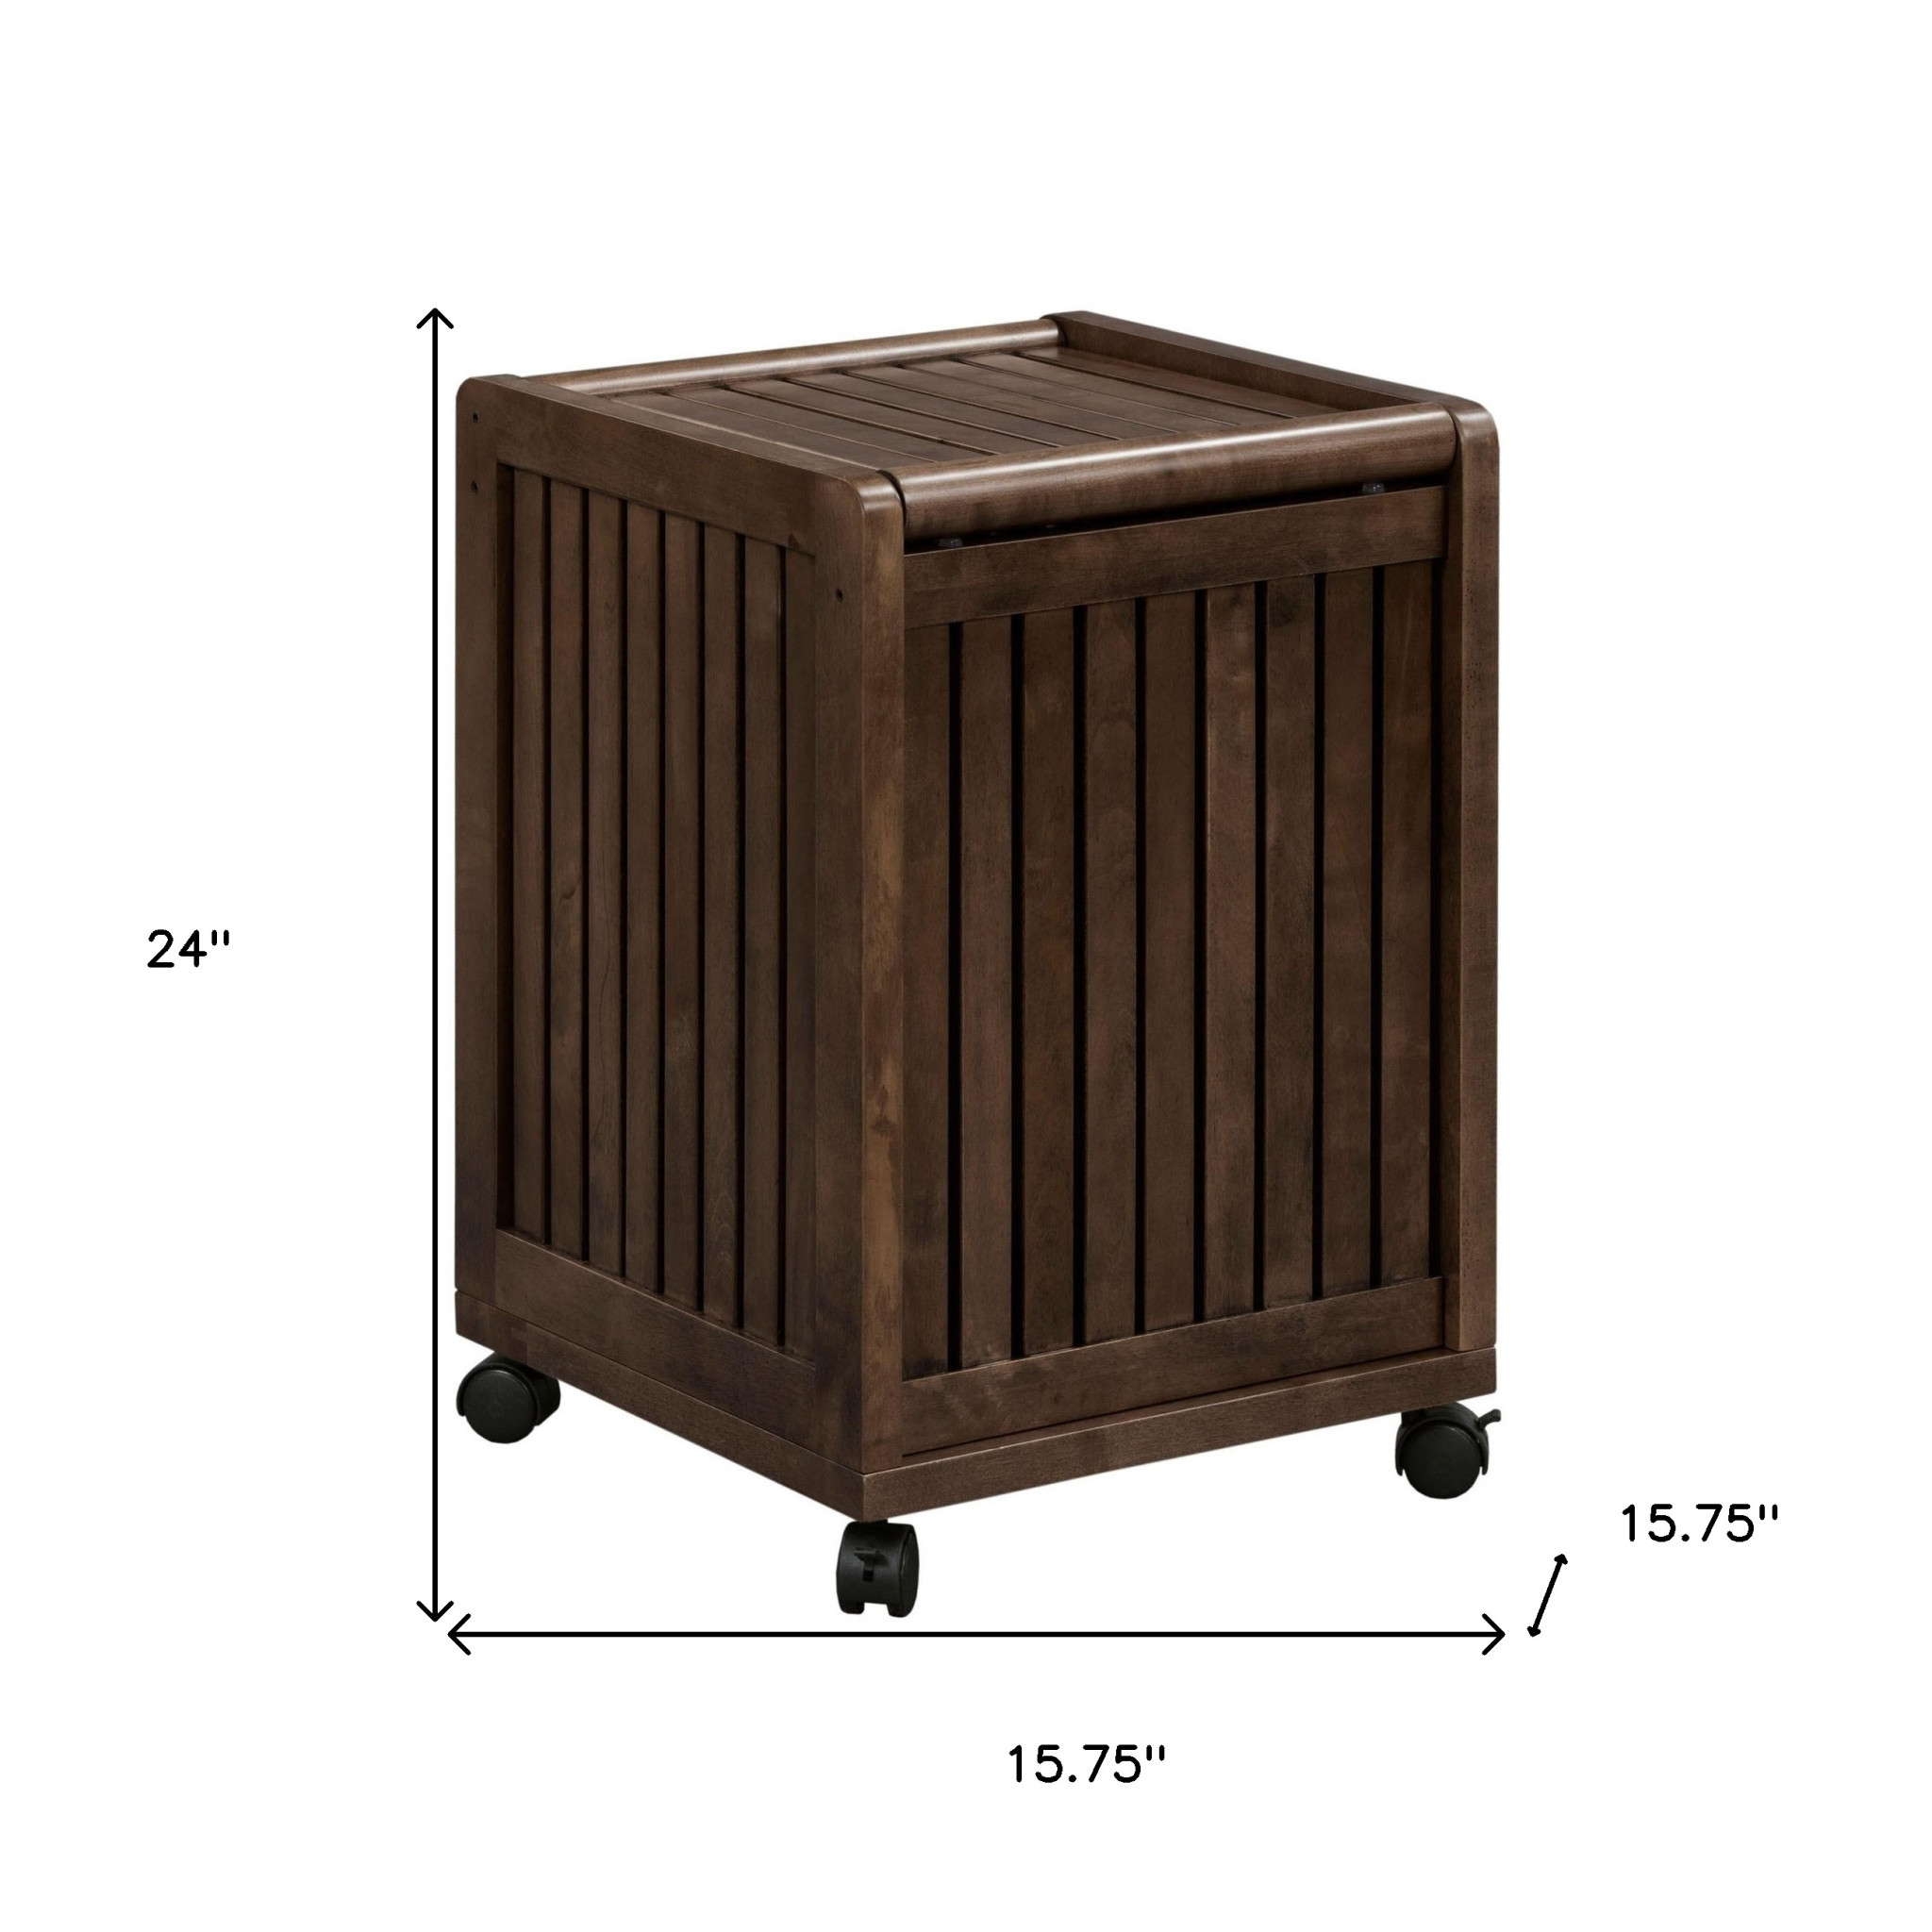 Rolling Solid Wood Laundry Hamper with Lid in Espresso